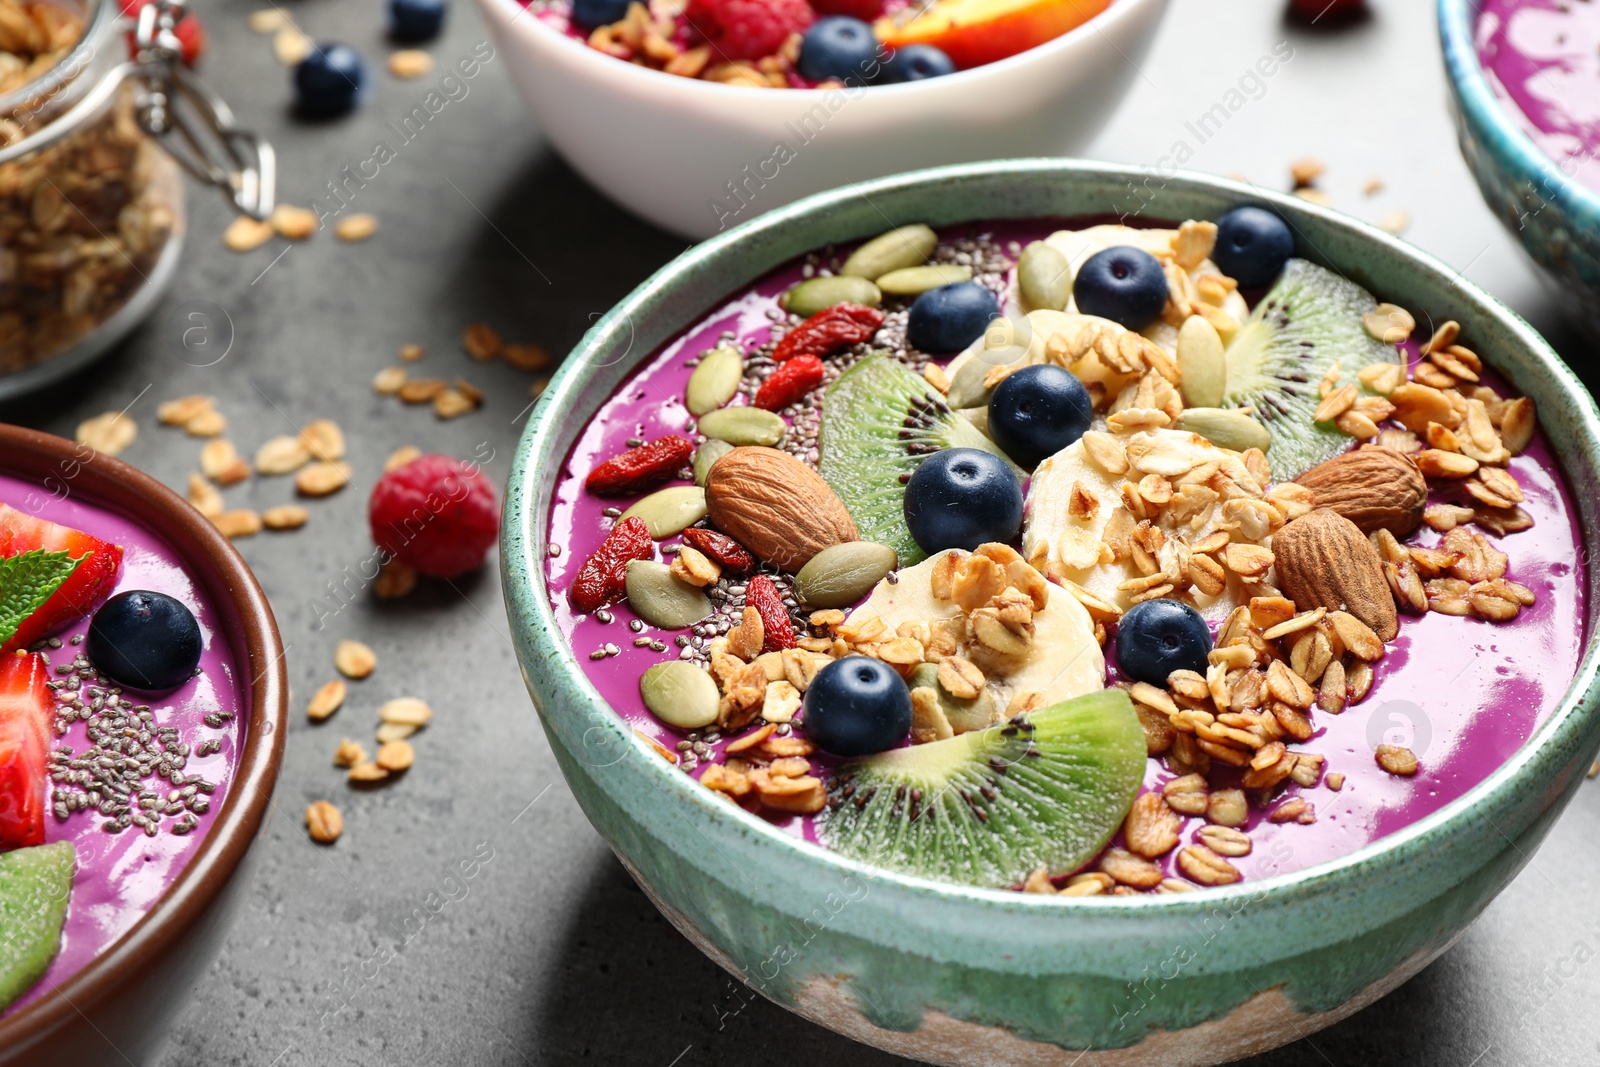 Image of Delicious acai smoothie with toppings in bowls on table